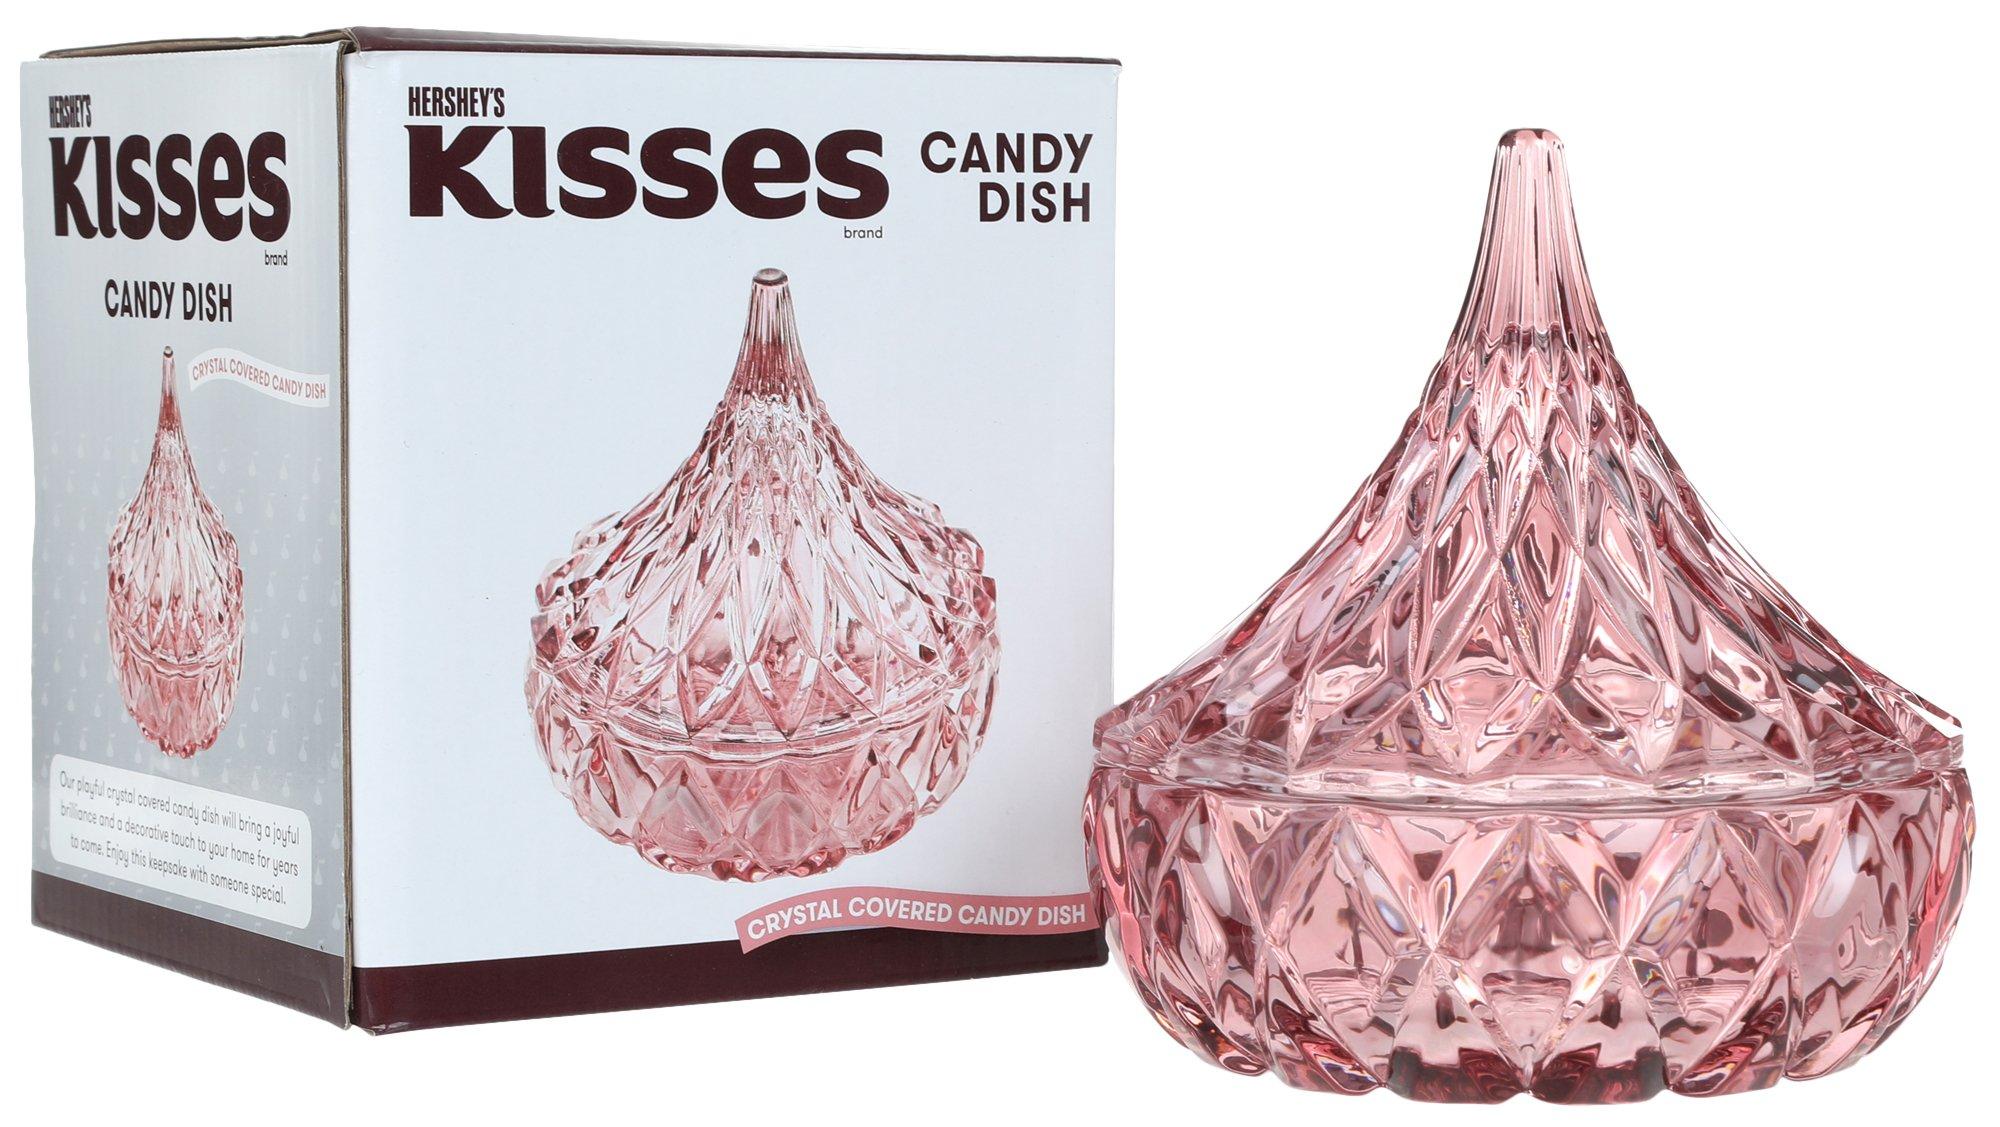 Hershey Kiss Crystal Covered Candy Dish